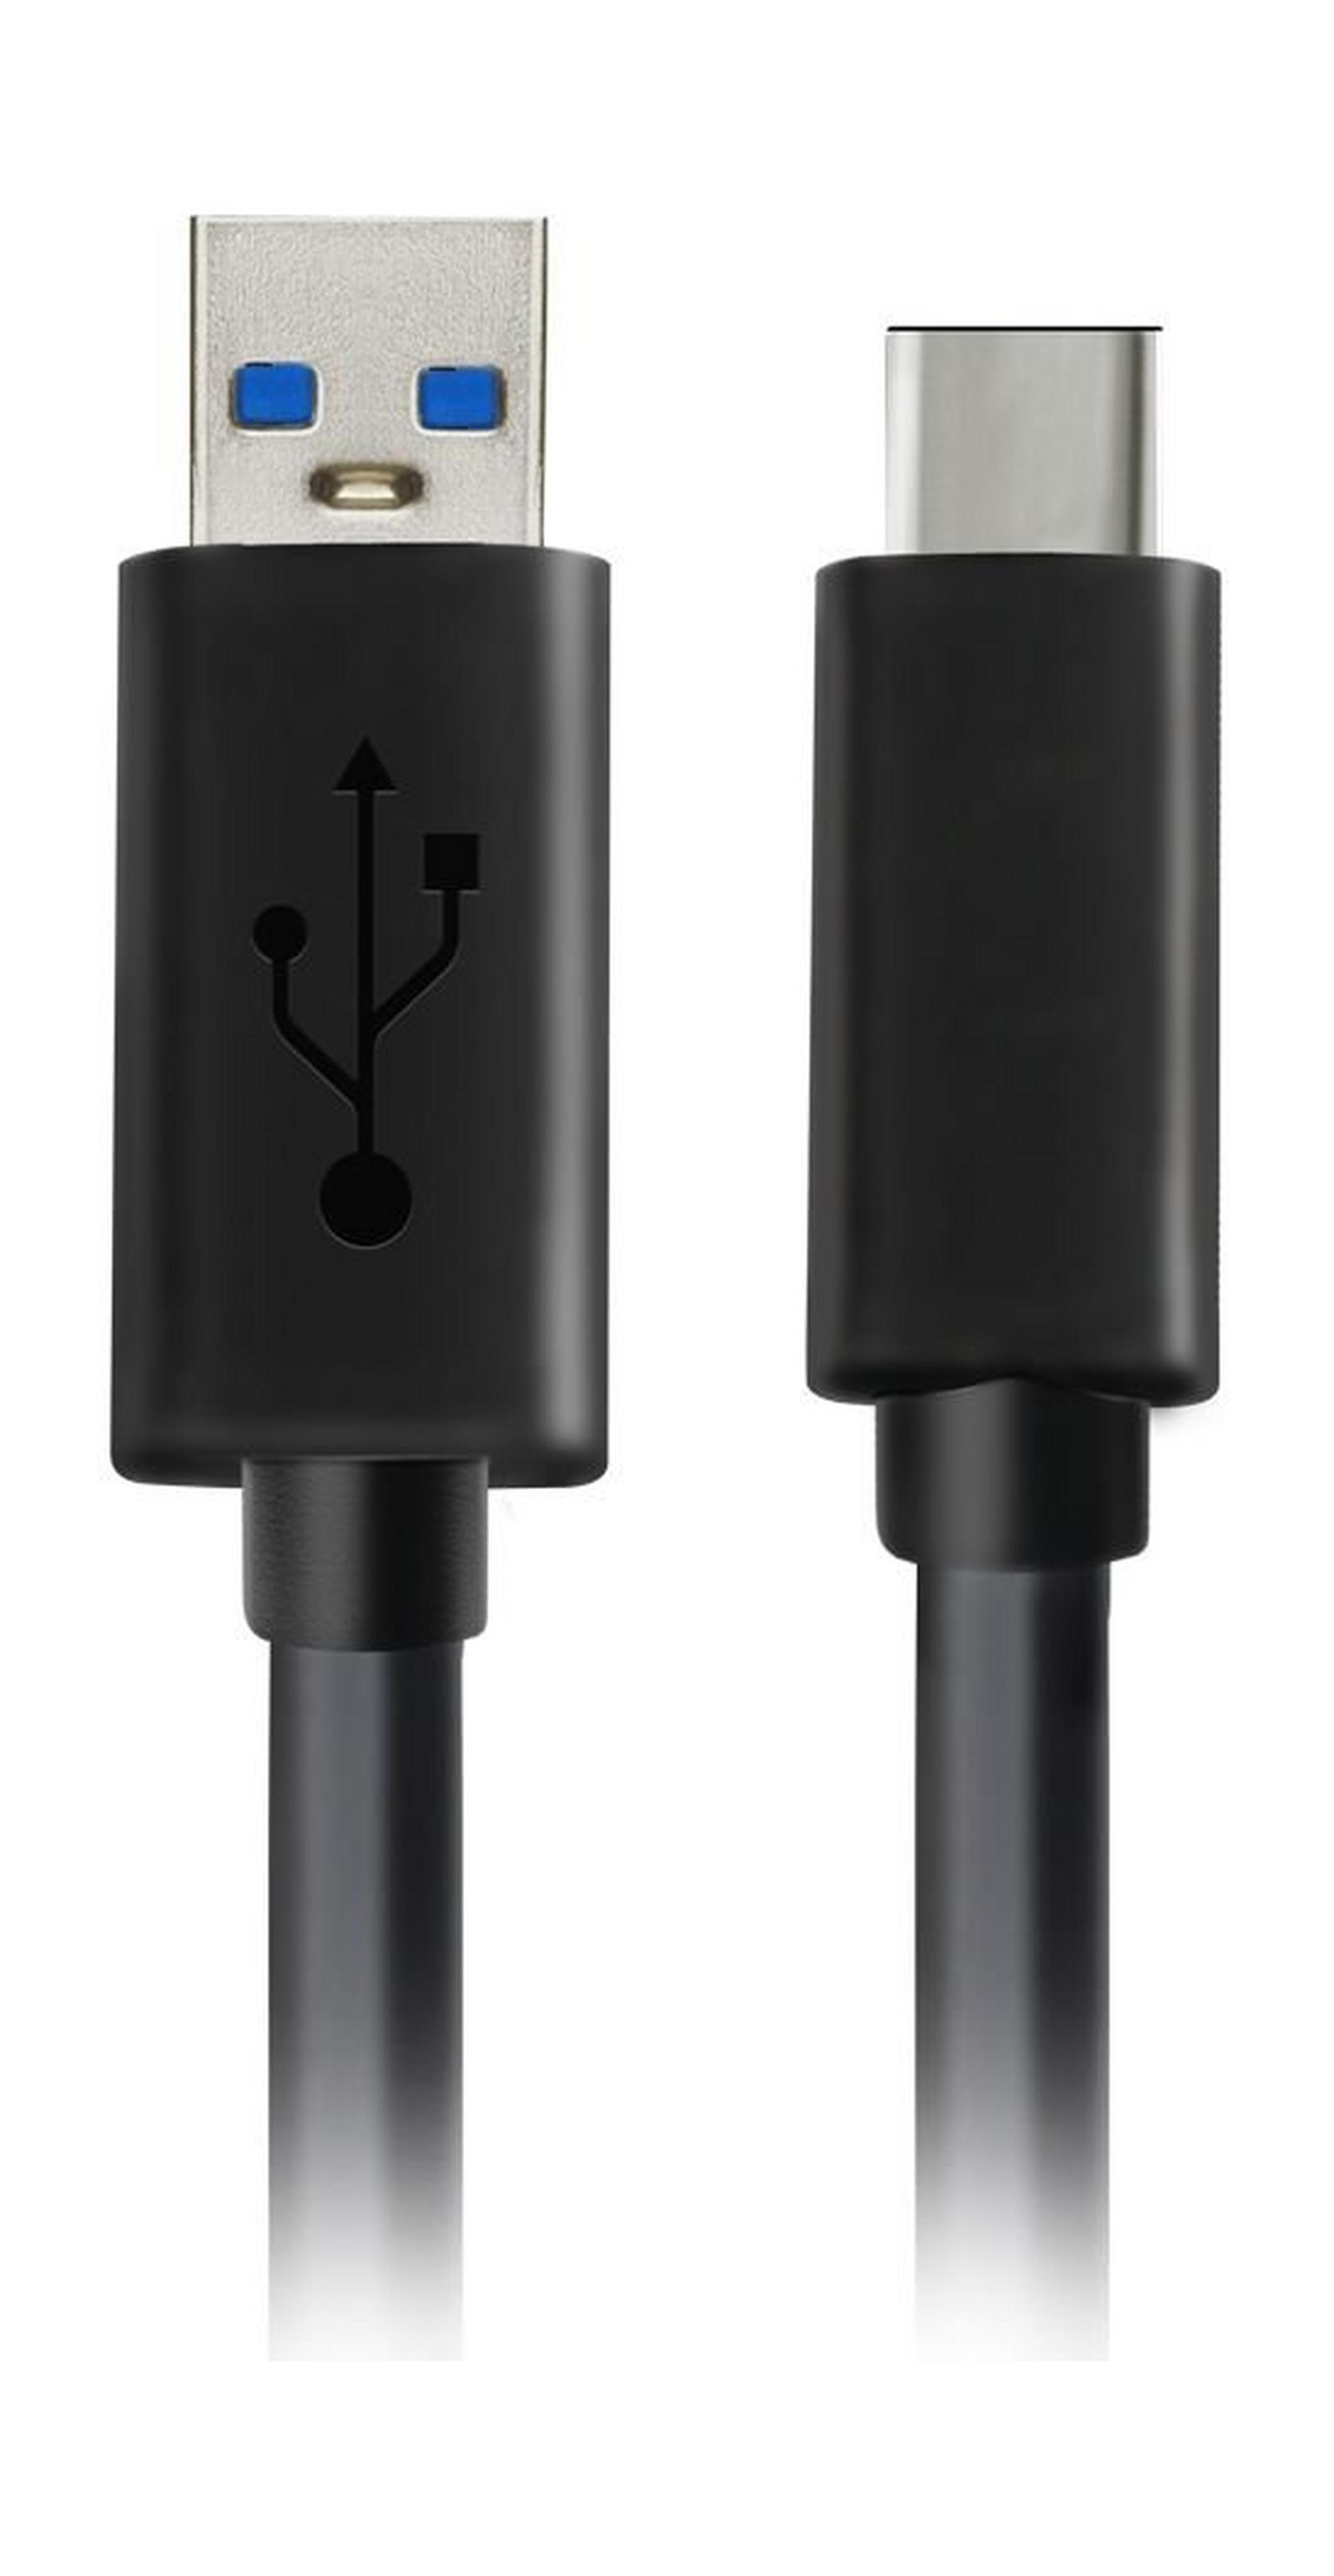 Promate UniLink USB 3.1 Type-C to USB-A Cable - Black